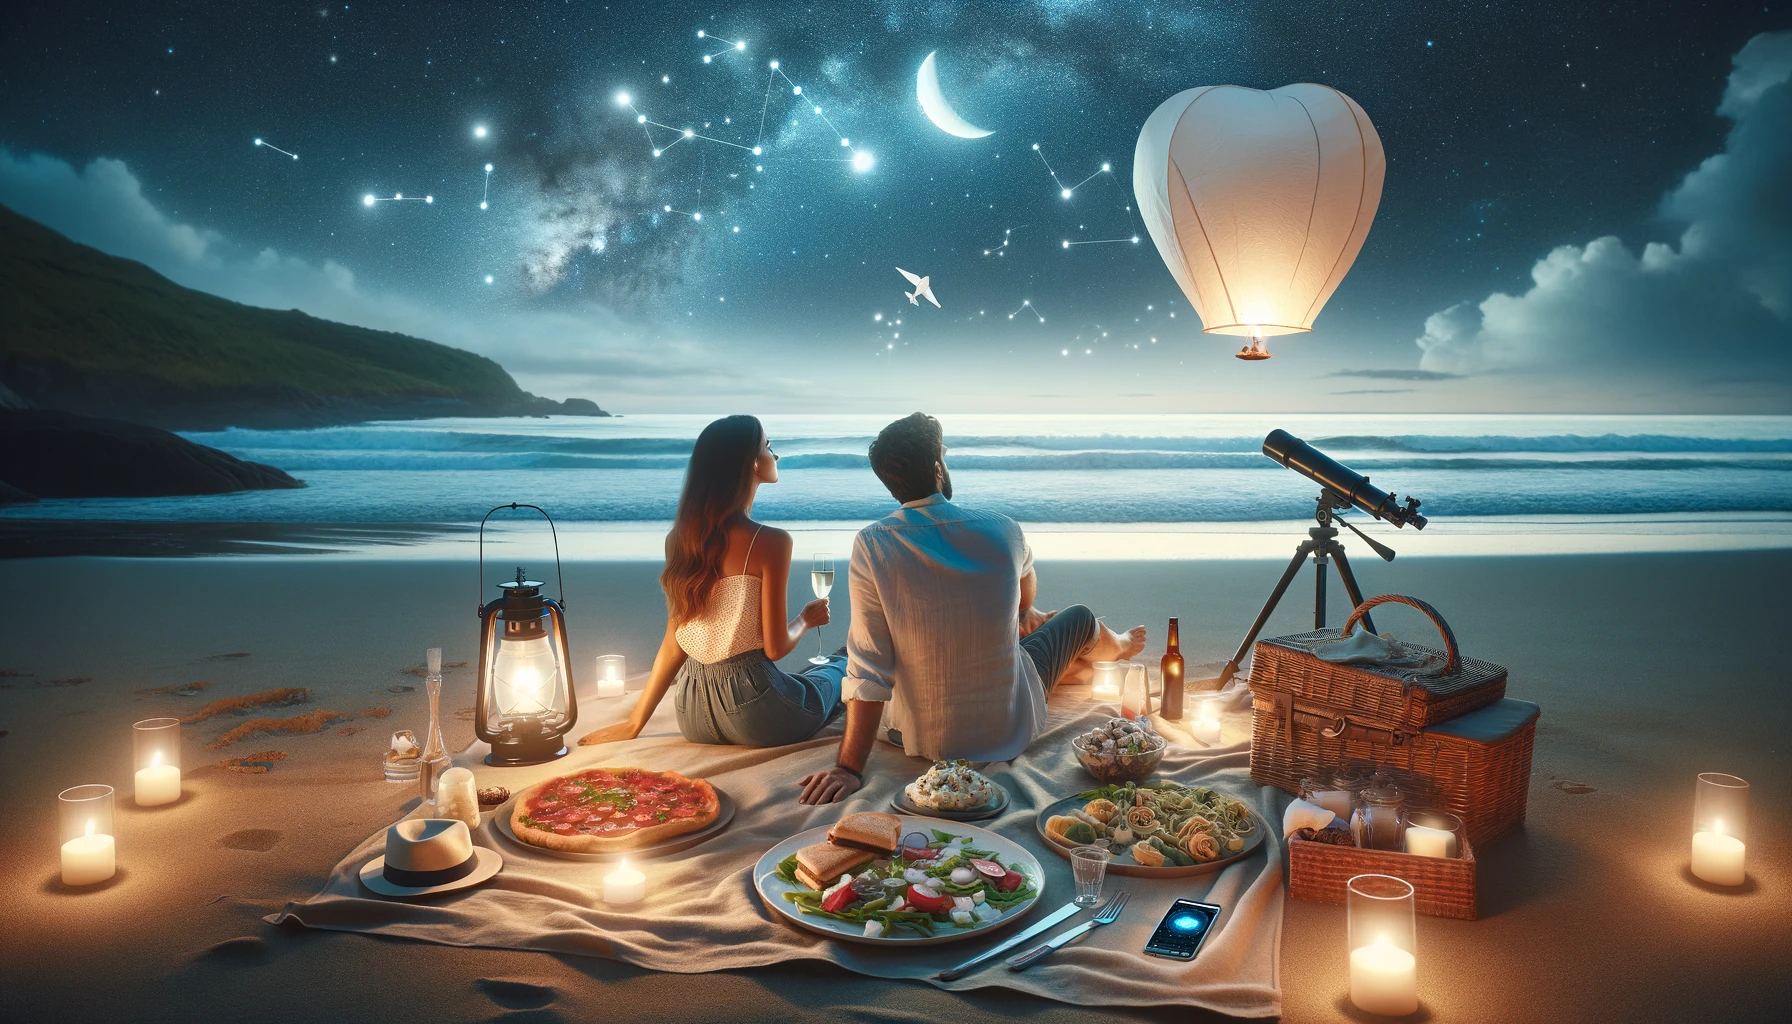 A serene beach scene at night with a couple having a picnic under a starlit sky. They're sitting on a comfortable blanket on the sand, surrounded by a telescope and a smartphone displaying a stargazing app. The picnic includes gourmet sandwiches, pasta salad, and chocolate truffles. Nearby, a softly glowing wish lantern is being released into the sky, symbolizing shared hopes and dreams. The night sky is beautifully clear, showcasing constellations and planets, creating an intimate and romantic atmosphere.